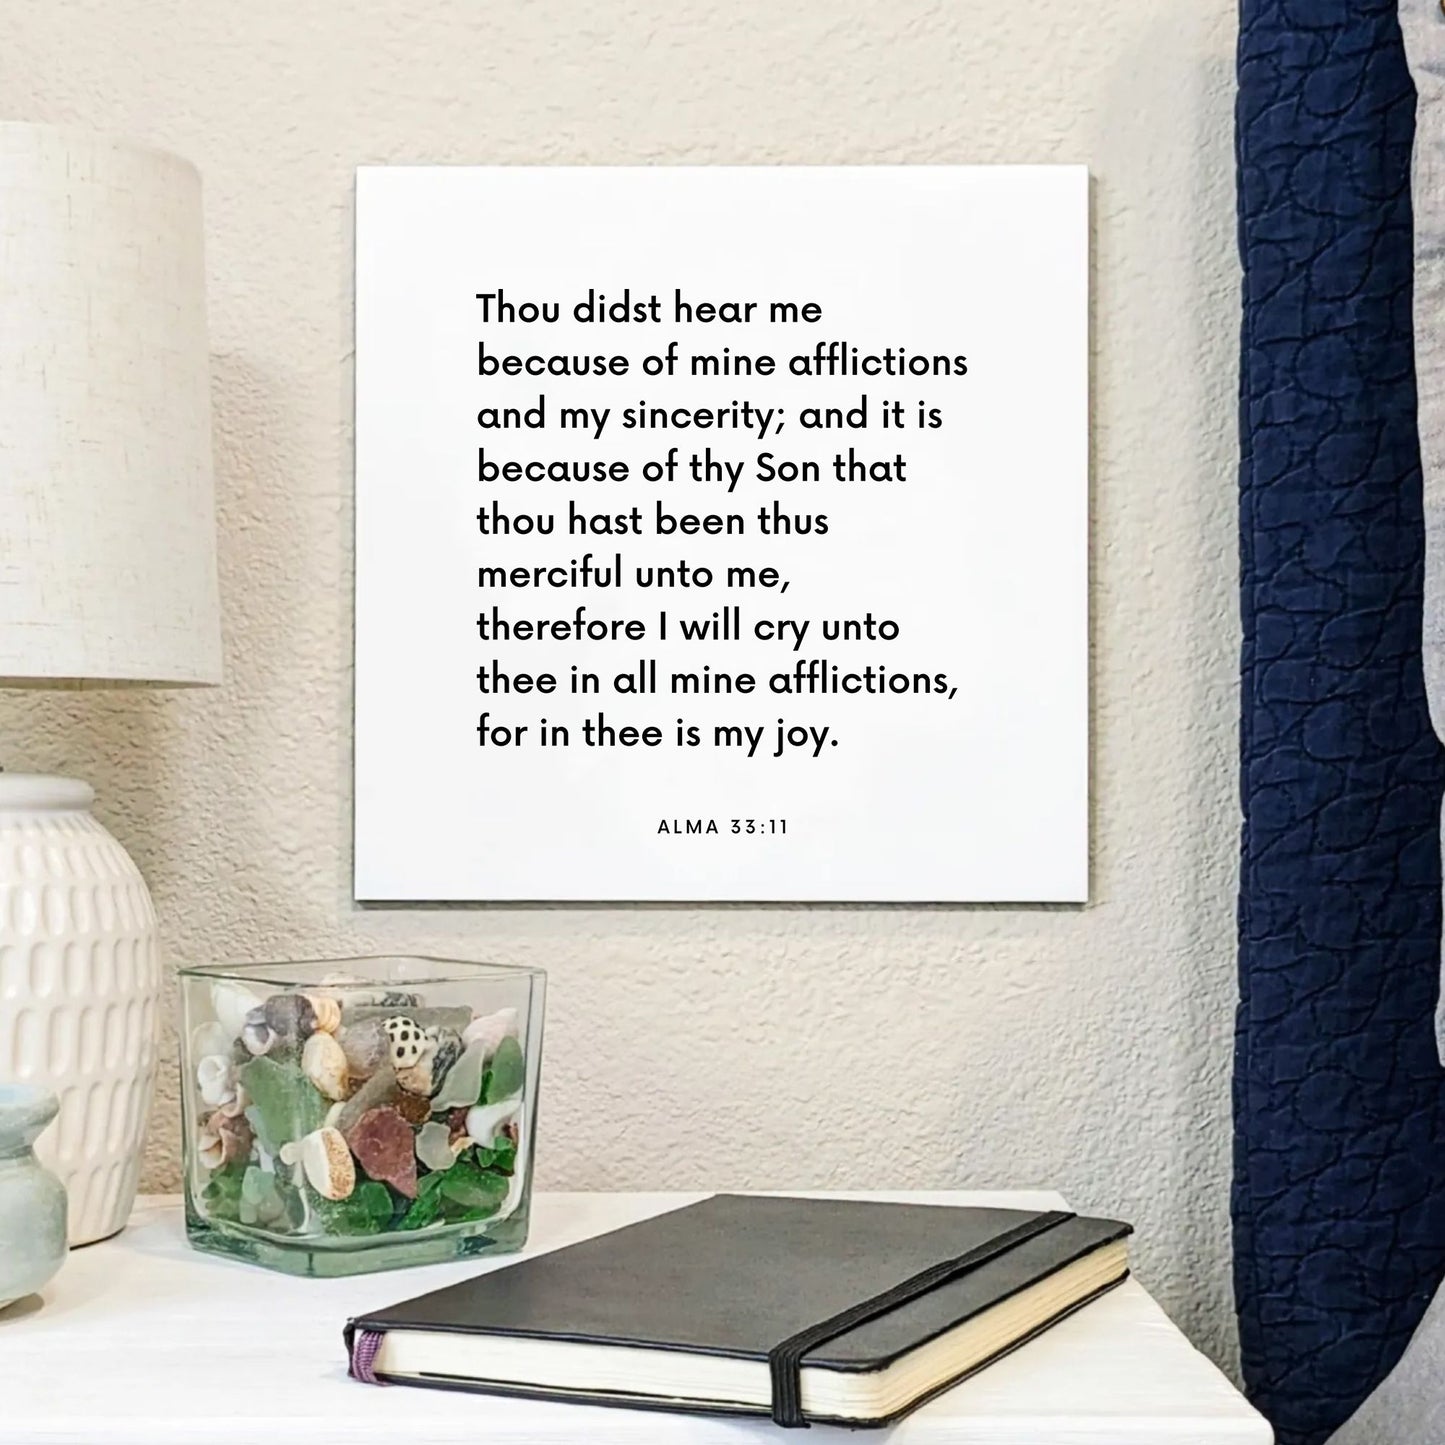 Bedside mouting of the scripture tile for Alma 33:11 - "I will cry unto thee in all mine afflictions"